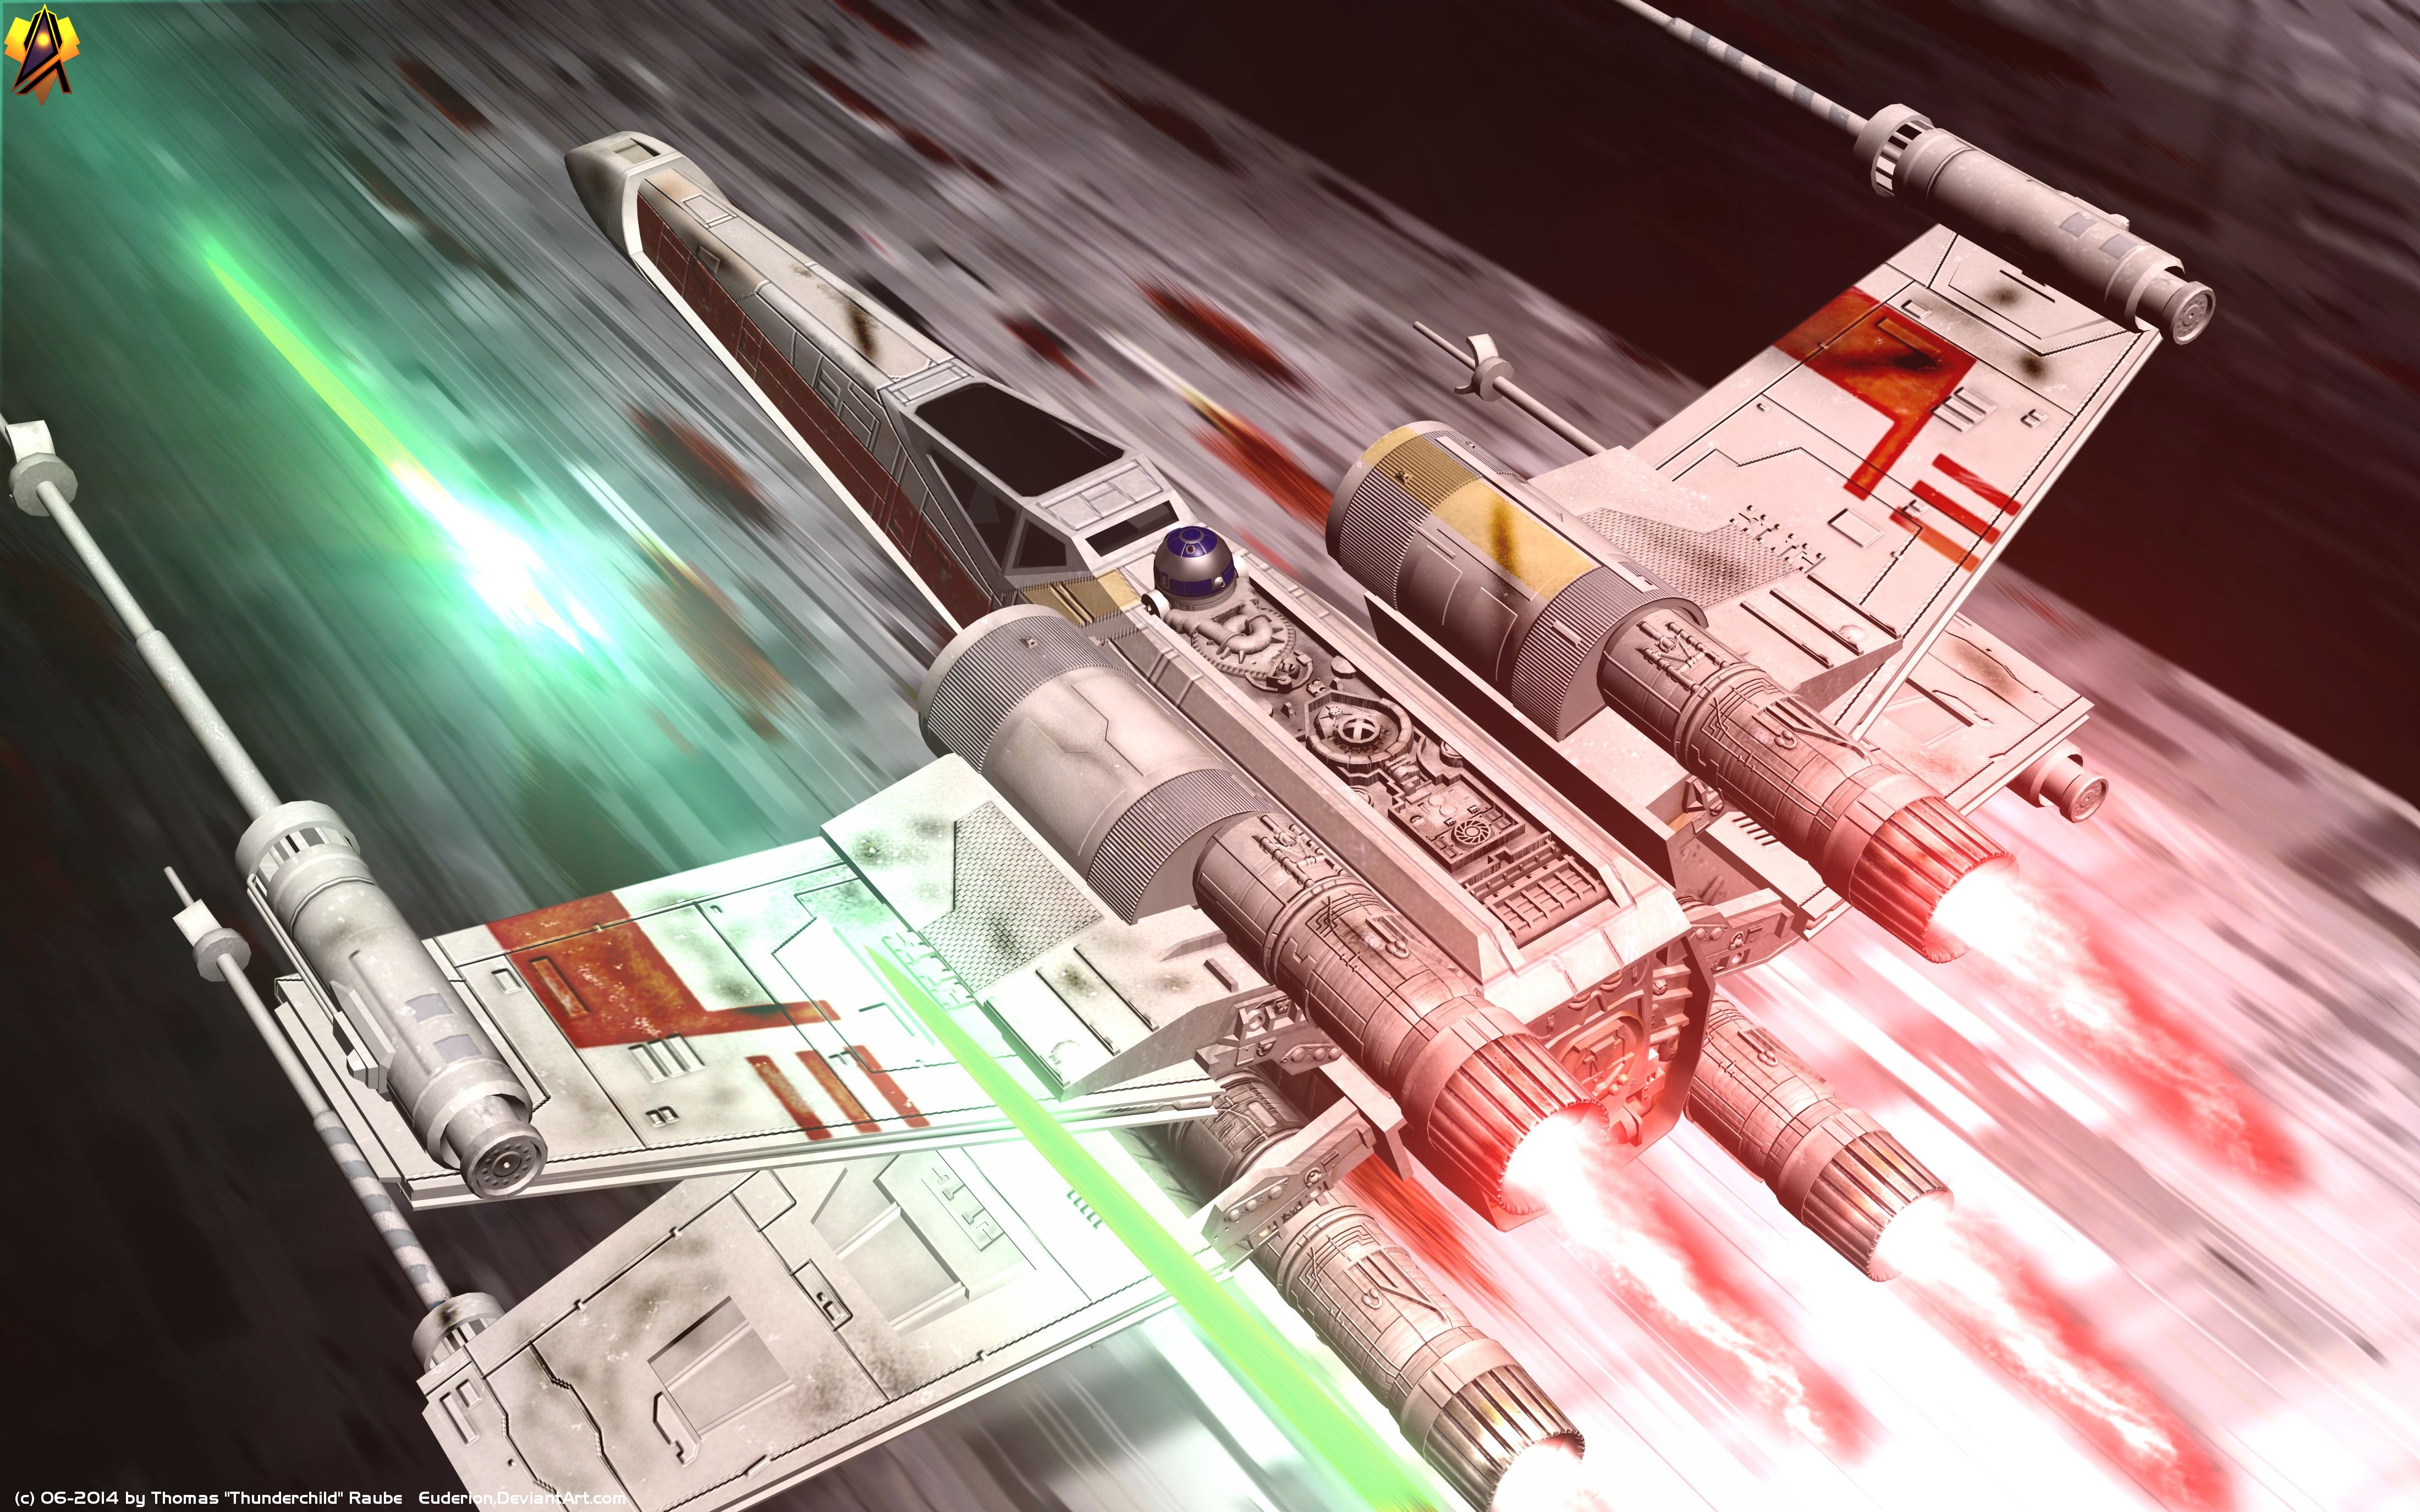 Movie Star Wars Episode IV: A New Hope HD Wallpaper | Background Image